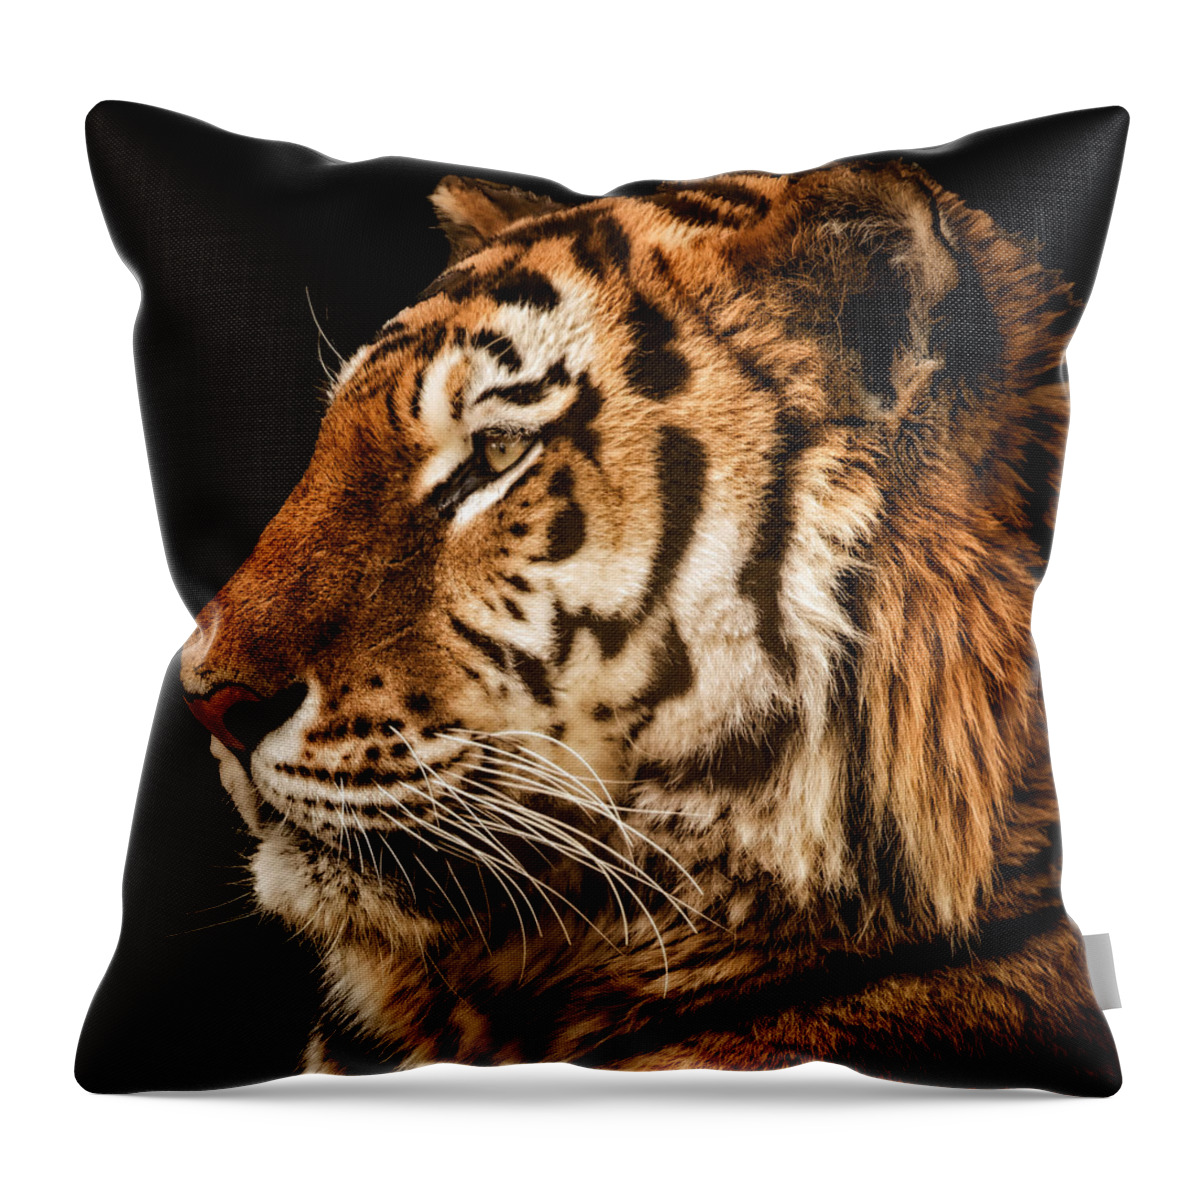 Tiger Throw Pillow featuring the photograph Sunset Tiger by Chris Boulton